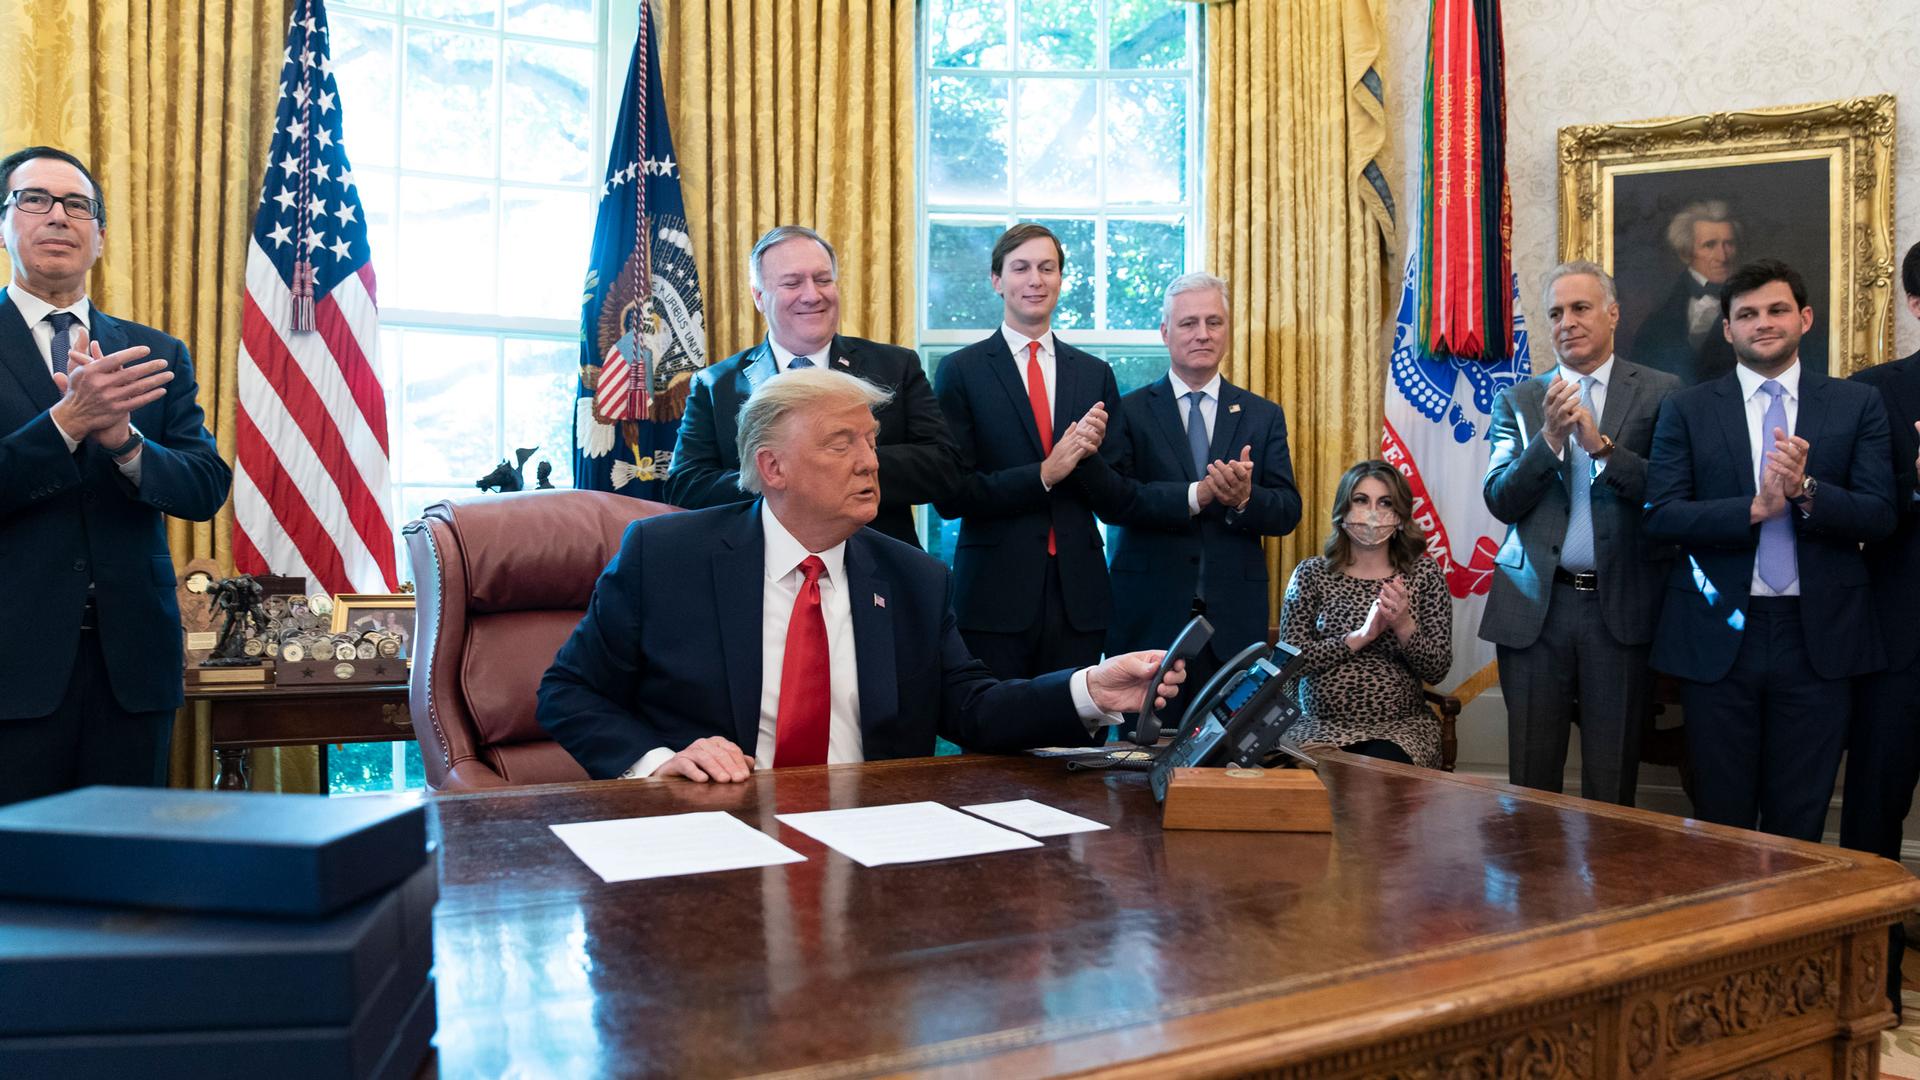 Donald Trump is shown sitting at a desk and wearing a dark suit with a red tie and hanging up a phone.